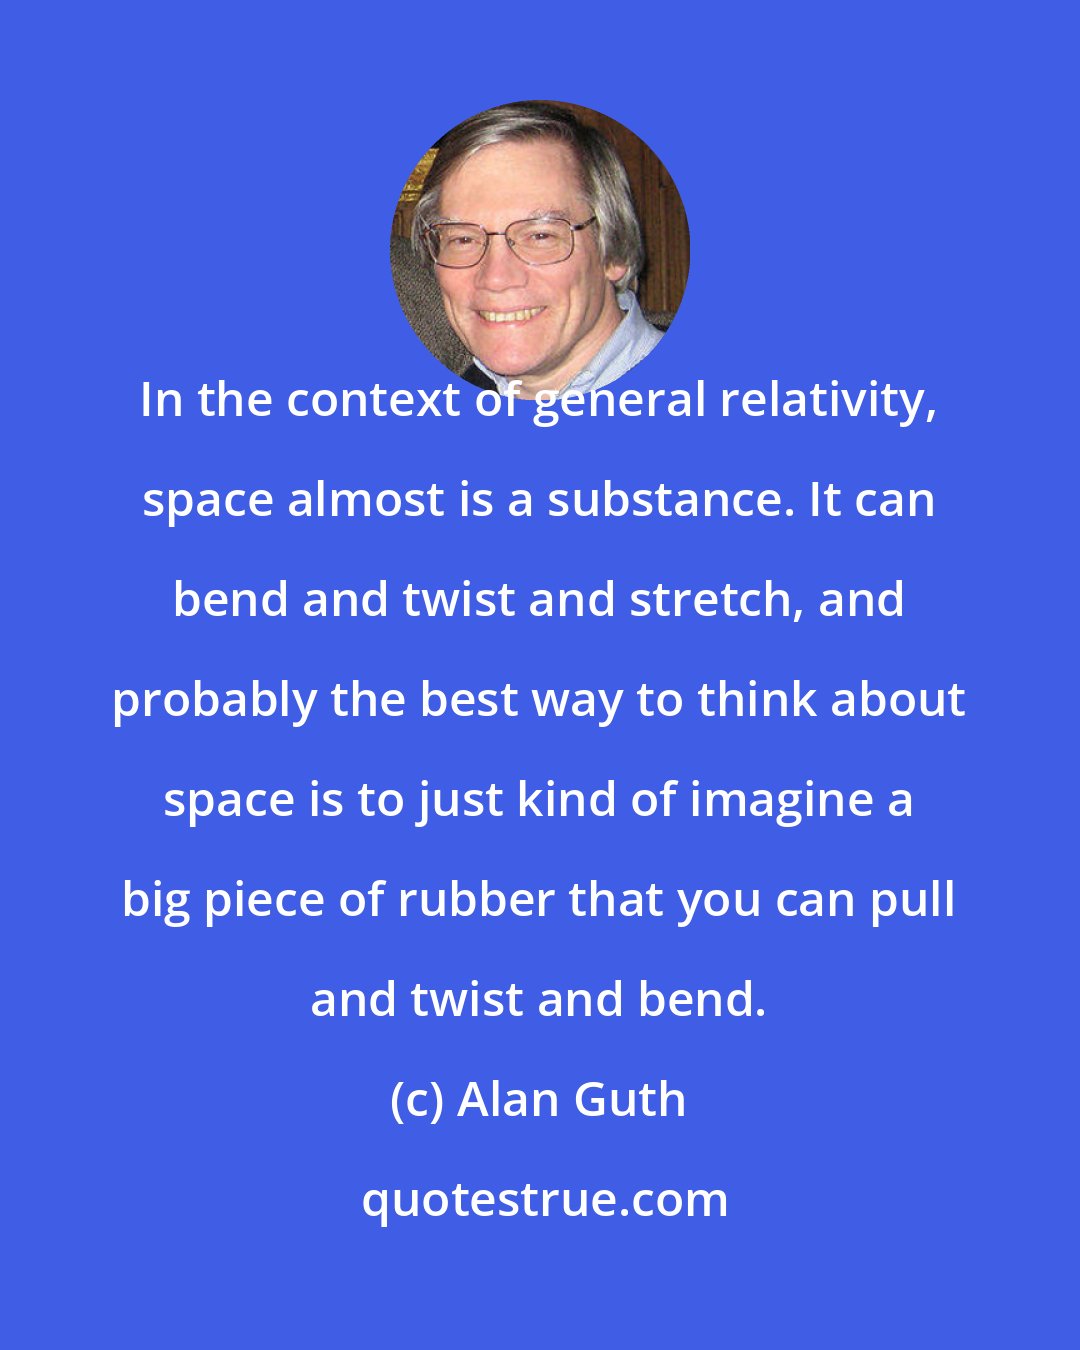 Alan Guth: In the context of general relativity, space almost is a substance. It can bend and twist and stretch, and probably the best way to think about space is to just kind of imagine a big piece of rubber that you can pull and twist and bend.